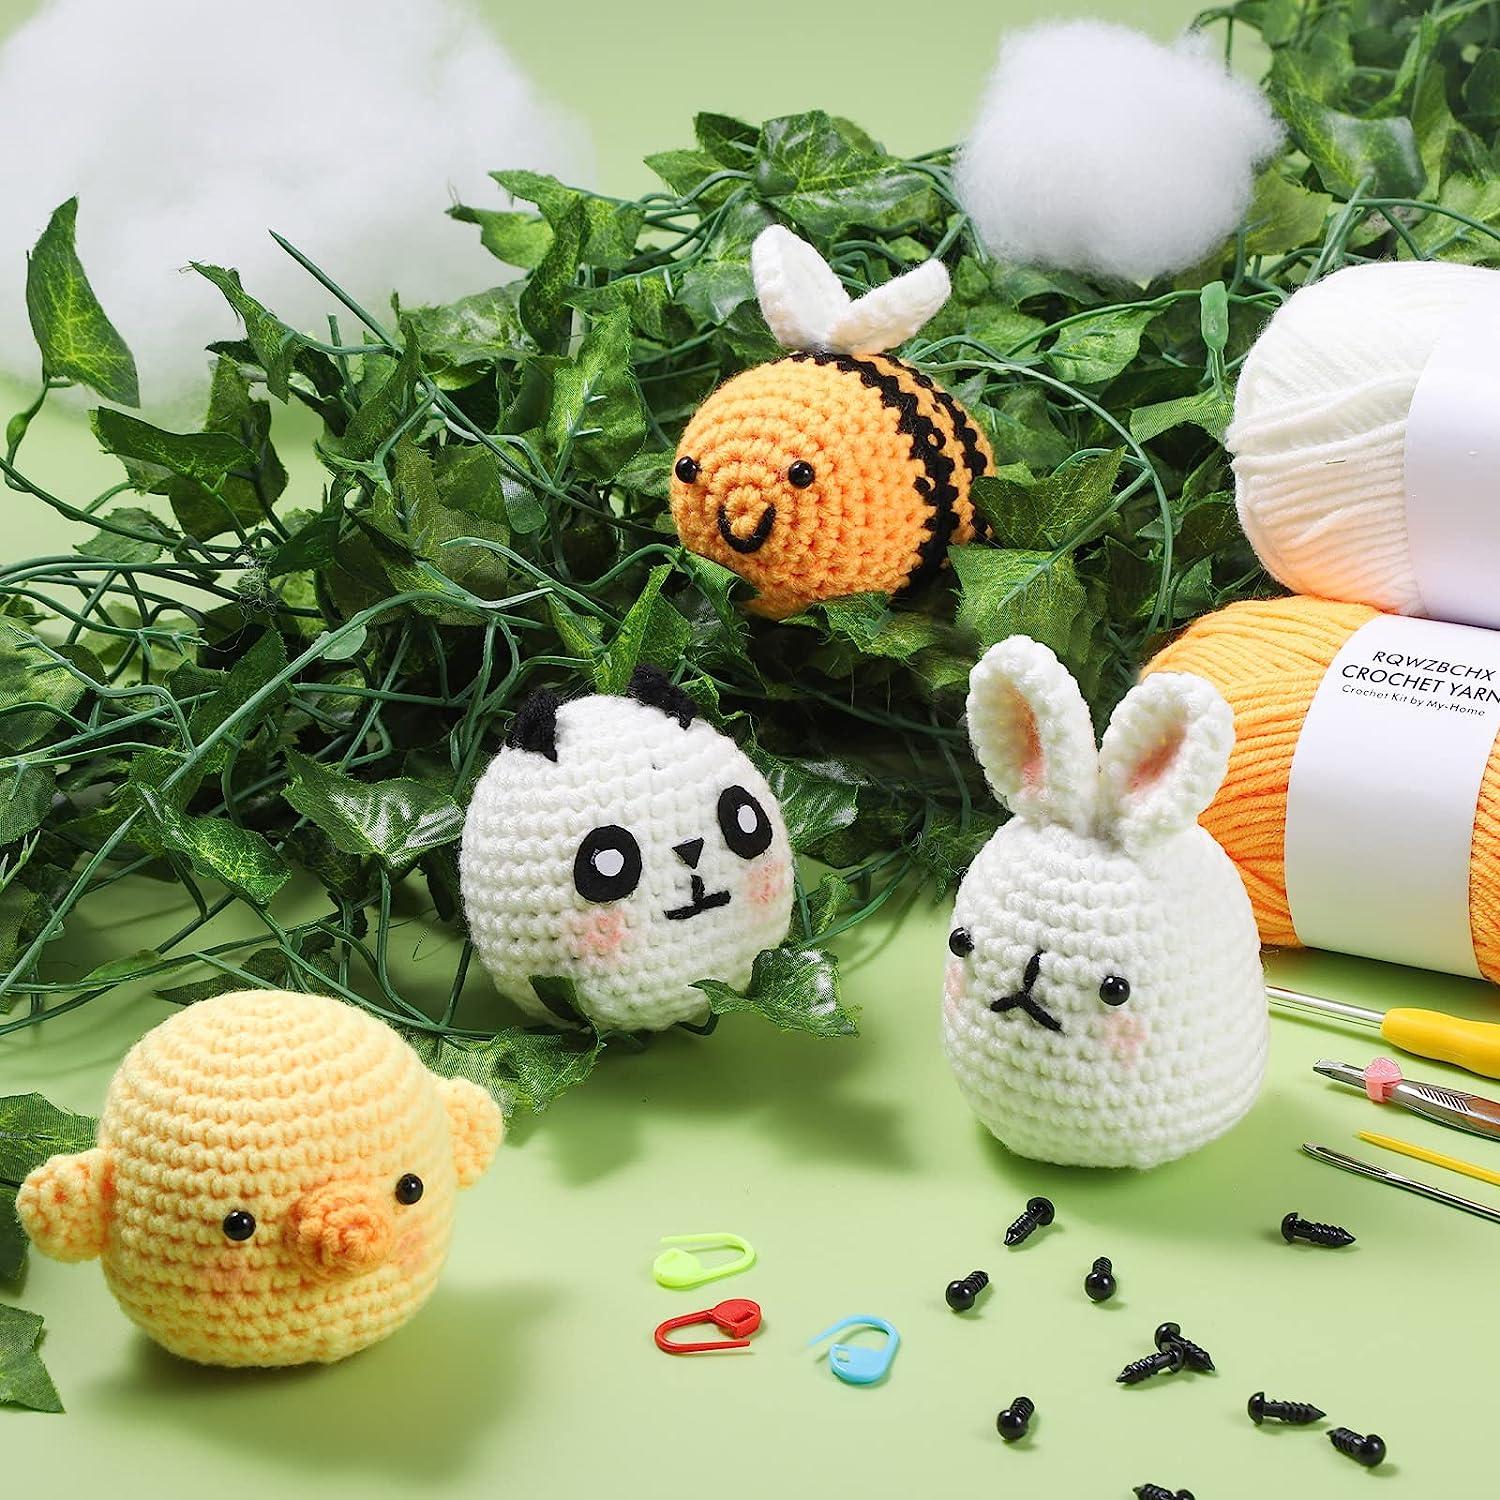 Learn to Crochet Kit for Beginners Adults with Step-by-Step Video Tutorials; Crochet Supplies to Make 4 Cute Amigurumi Animals; Crochet Bee, Chick